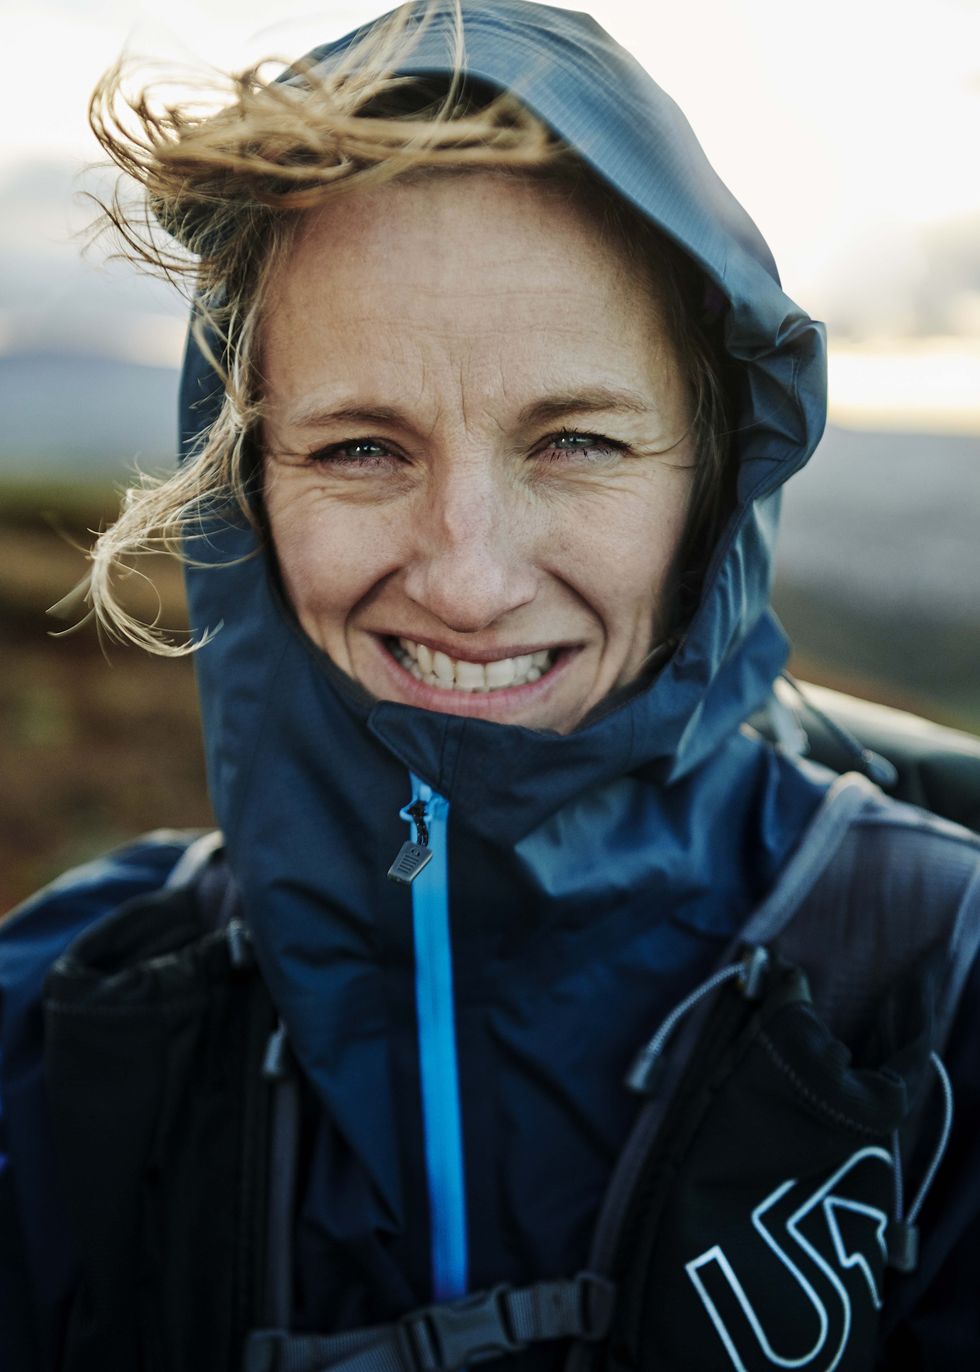 This woman ran the Spine Race in memory of her partner